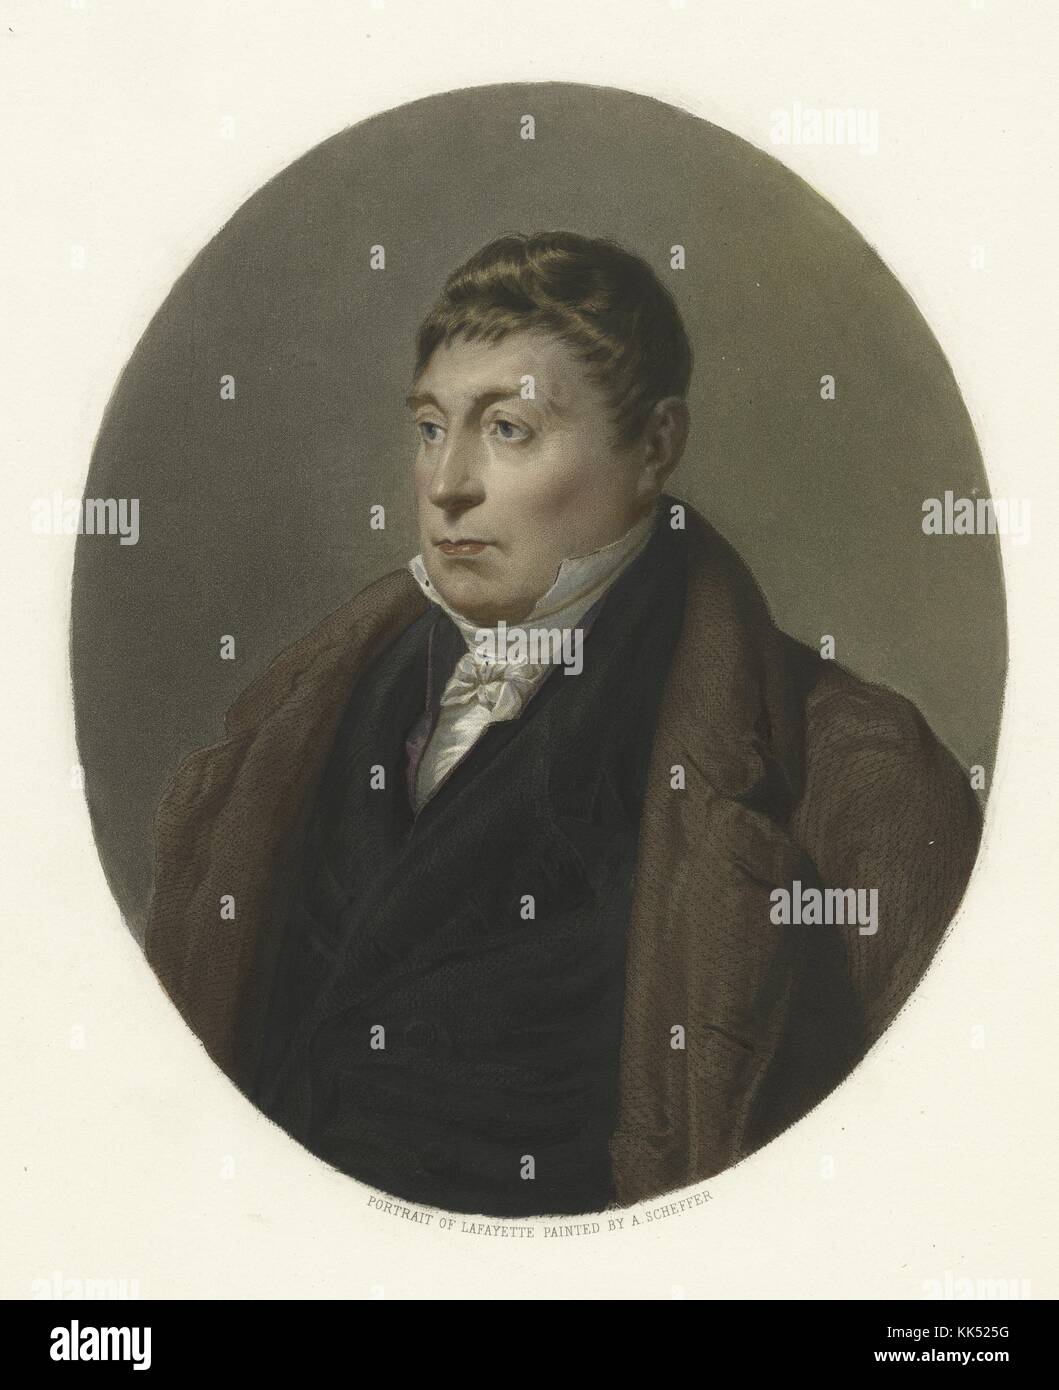 Portrait of Gilbert du Motier, Marquis de Lafayette, French aristocrat and military officer who fought for the United States in the American Revolutionary War, was a key figure in the French Revolution of 1789 and the July Revolution of 1830, as a mature man, wearing a jacket and coat, white lace collar, by A Scheffer, 1843. From the New York Public Library. Stock Photo